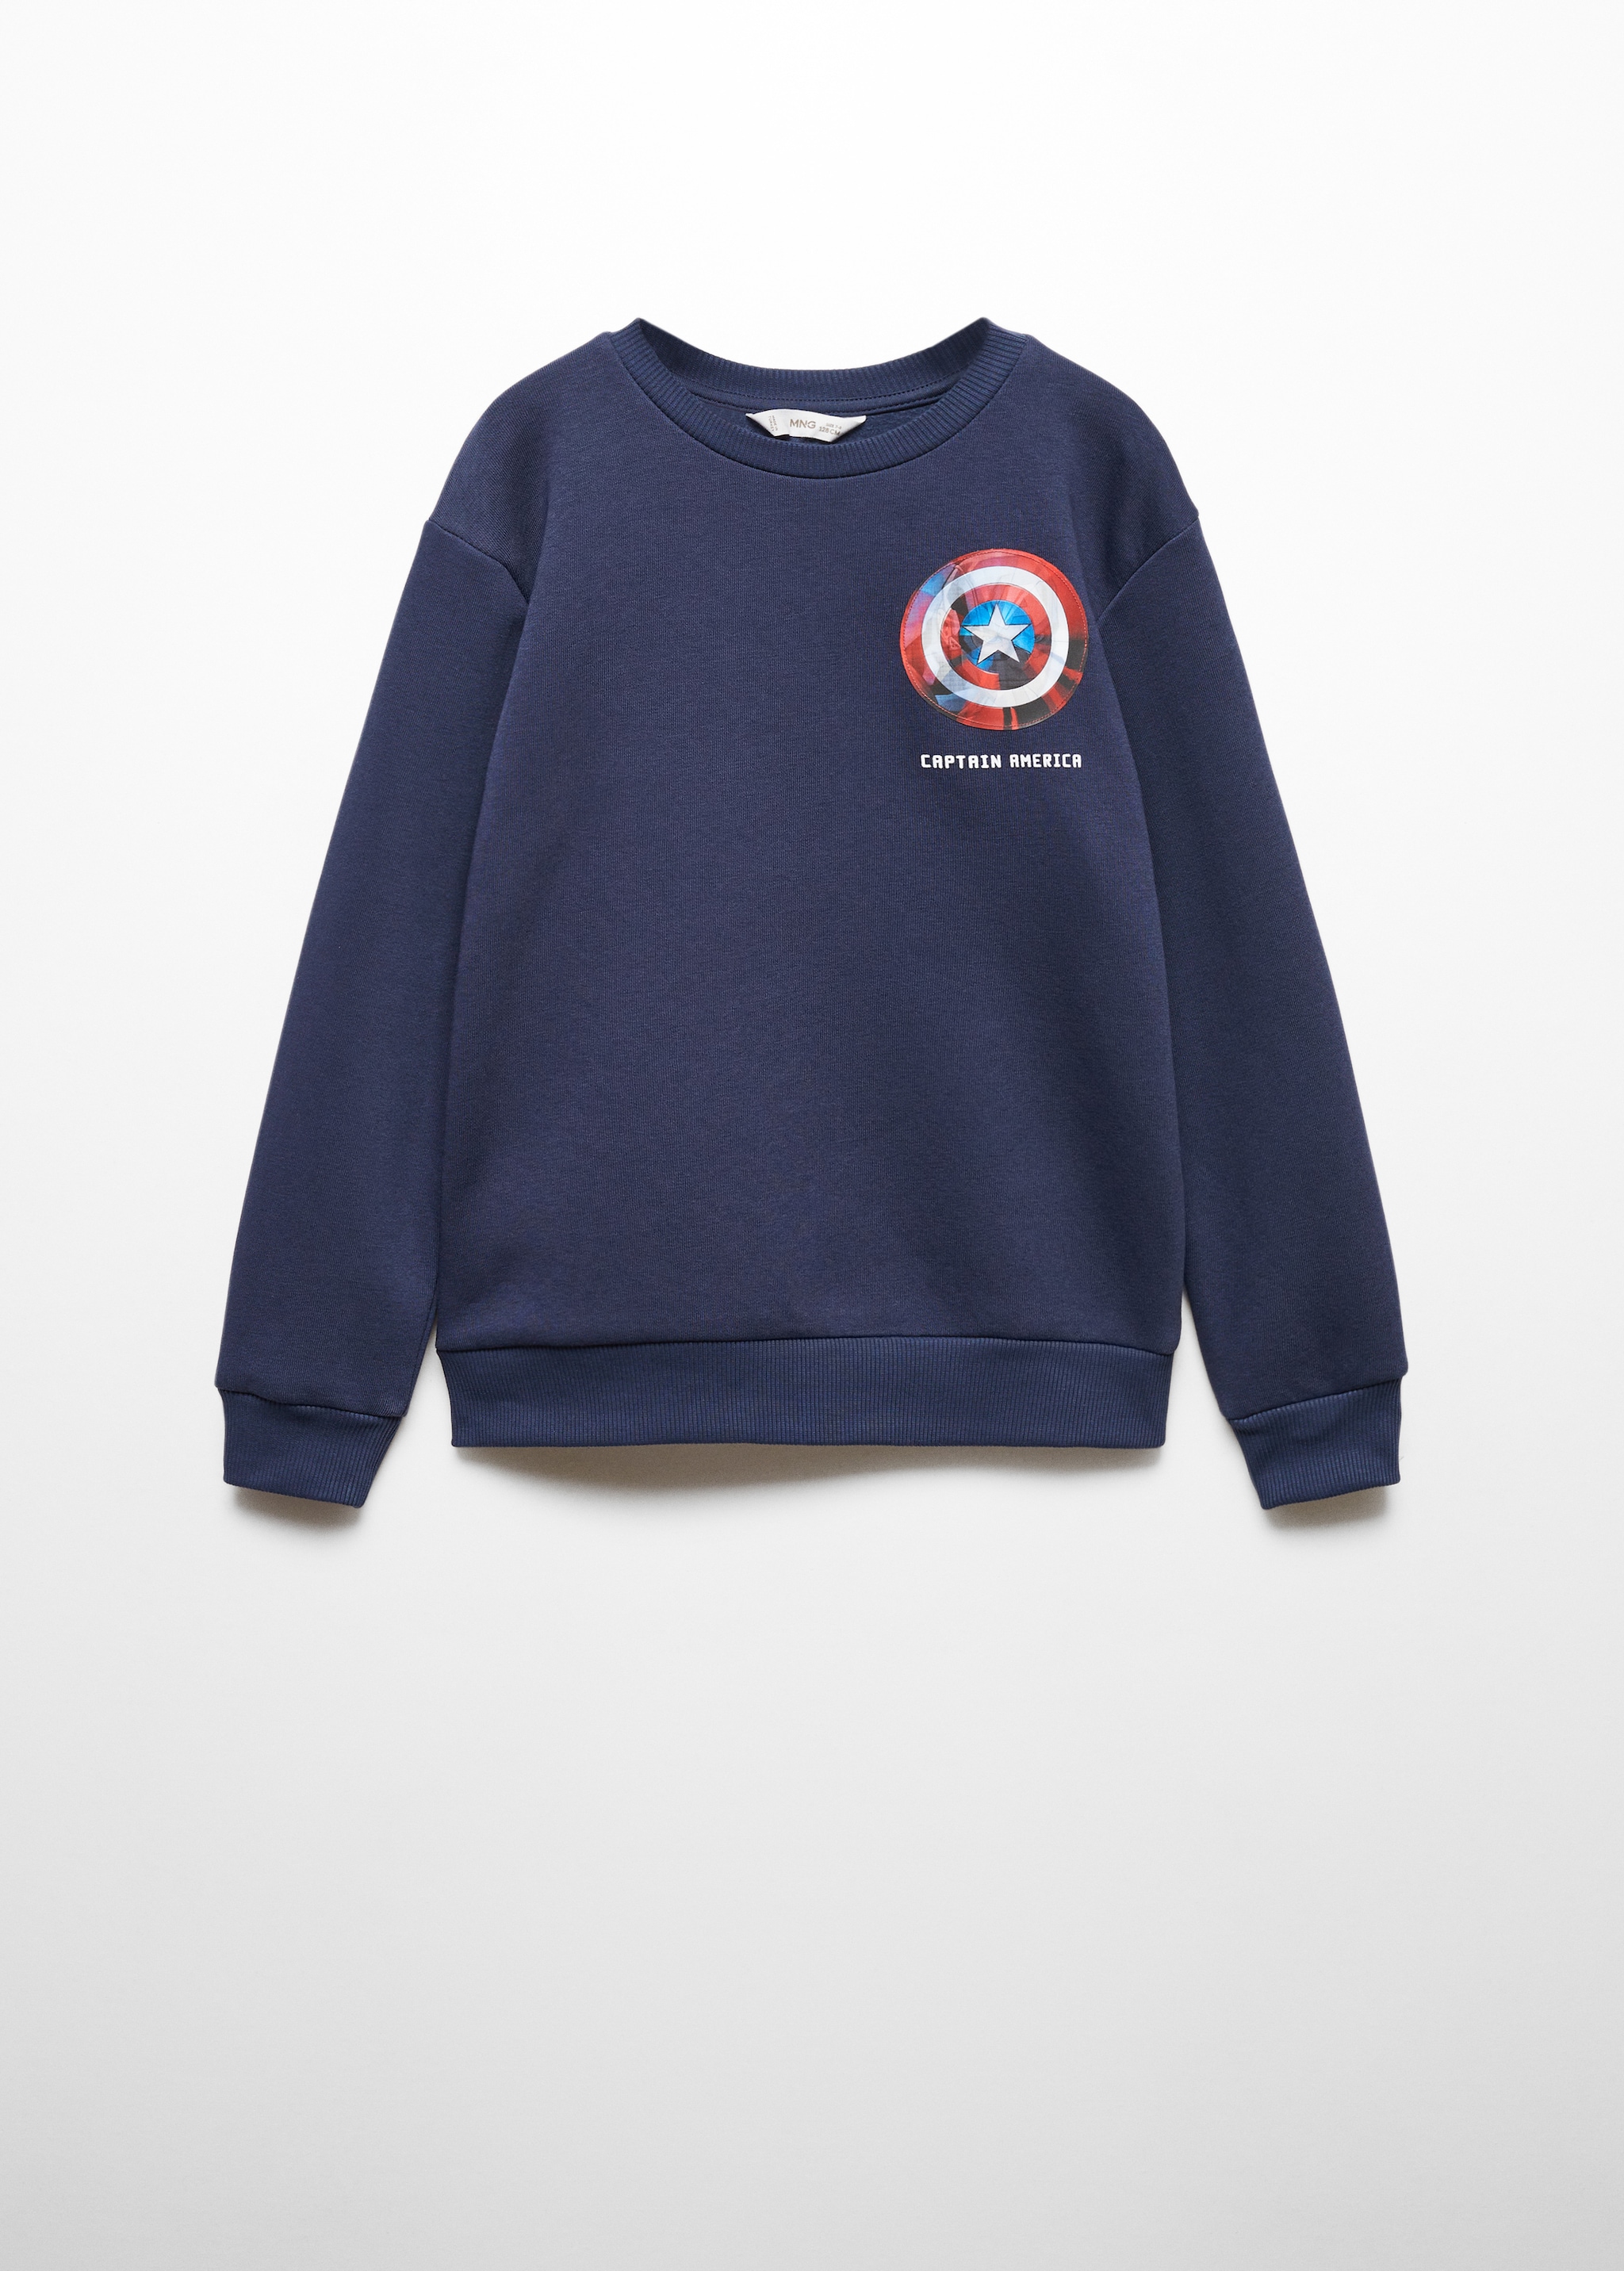 Captain America Sweatshirt - Article without model